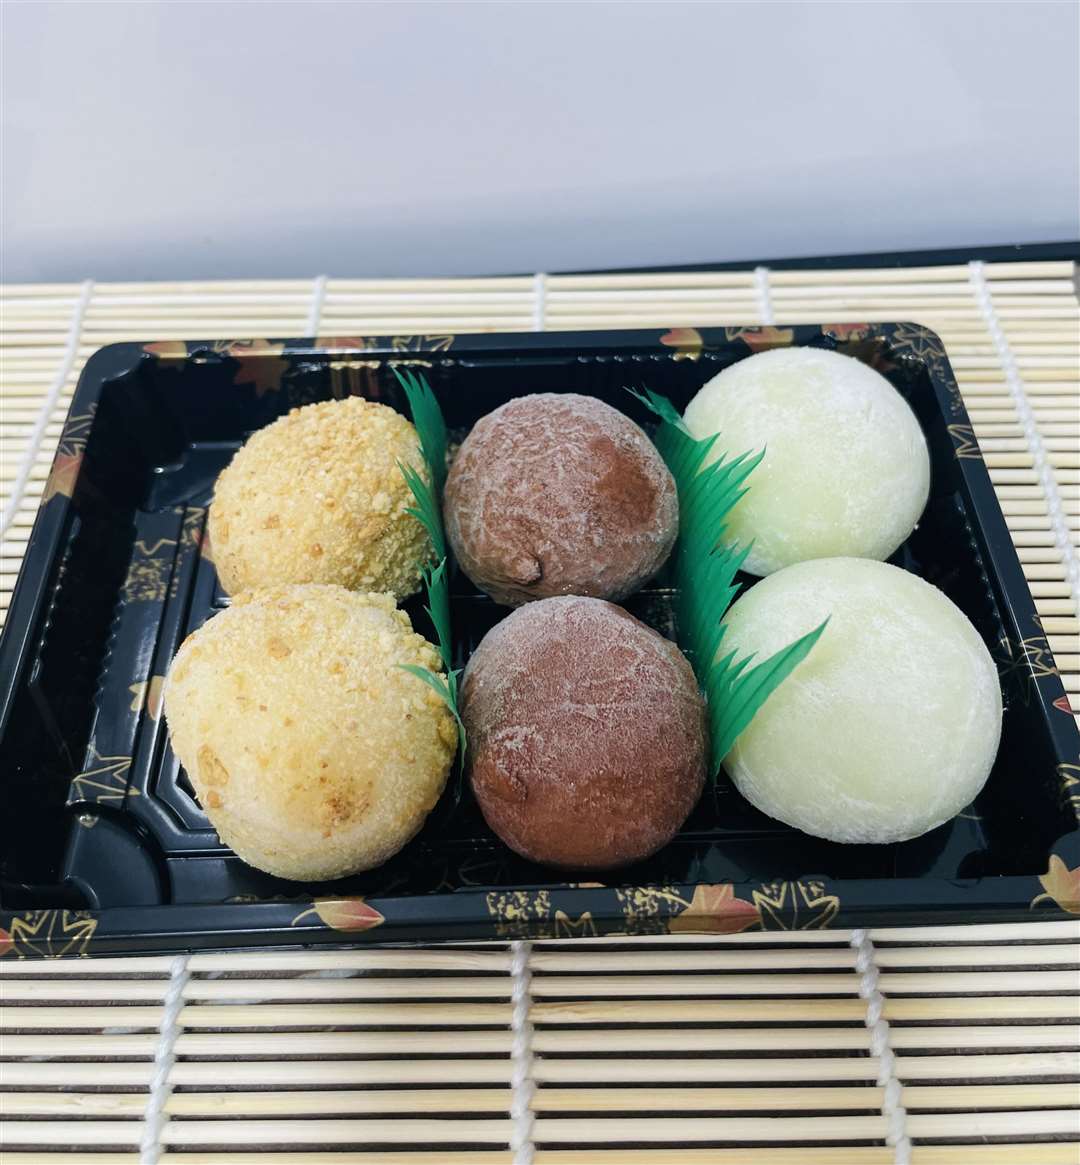 Foodies can also get their hands on mochi ice cream for dessert at Kings Fish Bar